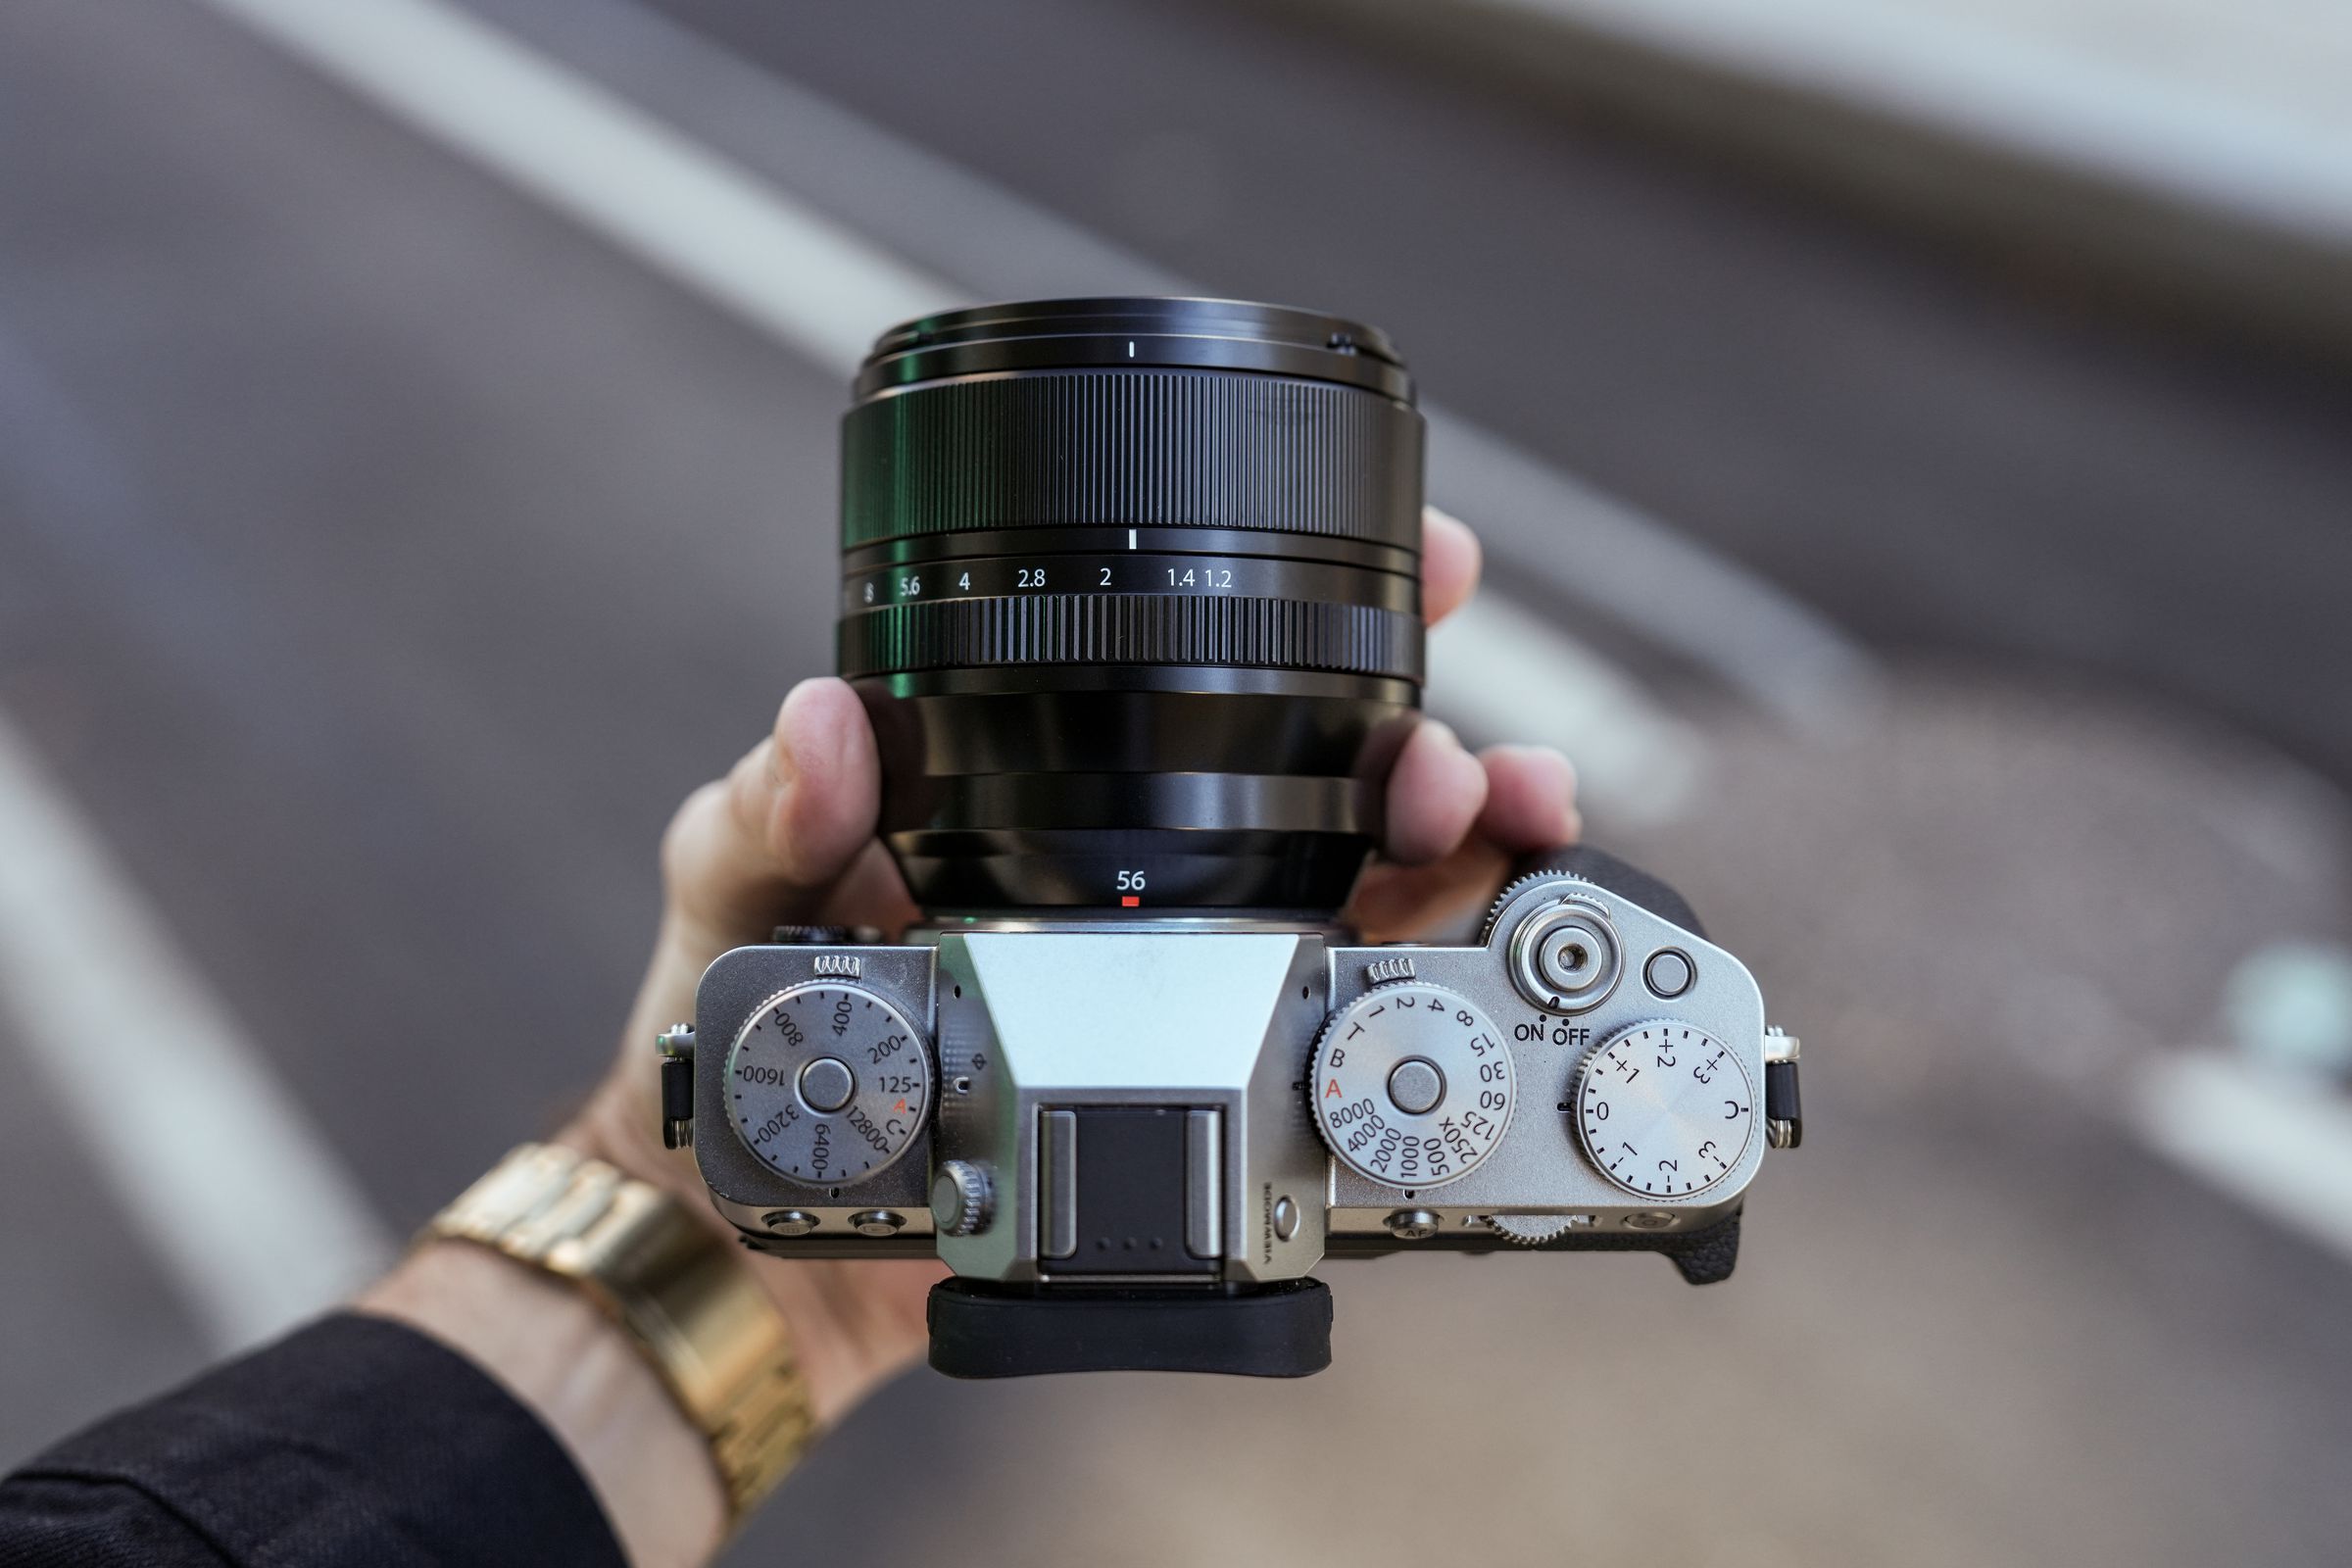 While the X-H2 and X-H2S have switched to more contemporary controls with a mode dial, the X-T5 sticks to the retro stylings of dedicated dials for shutter speed, ISO, and exposure compensation.